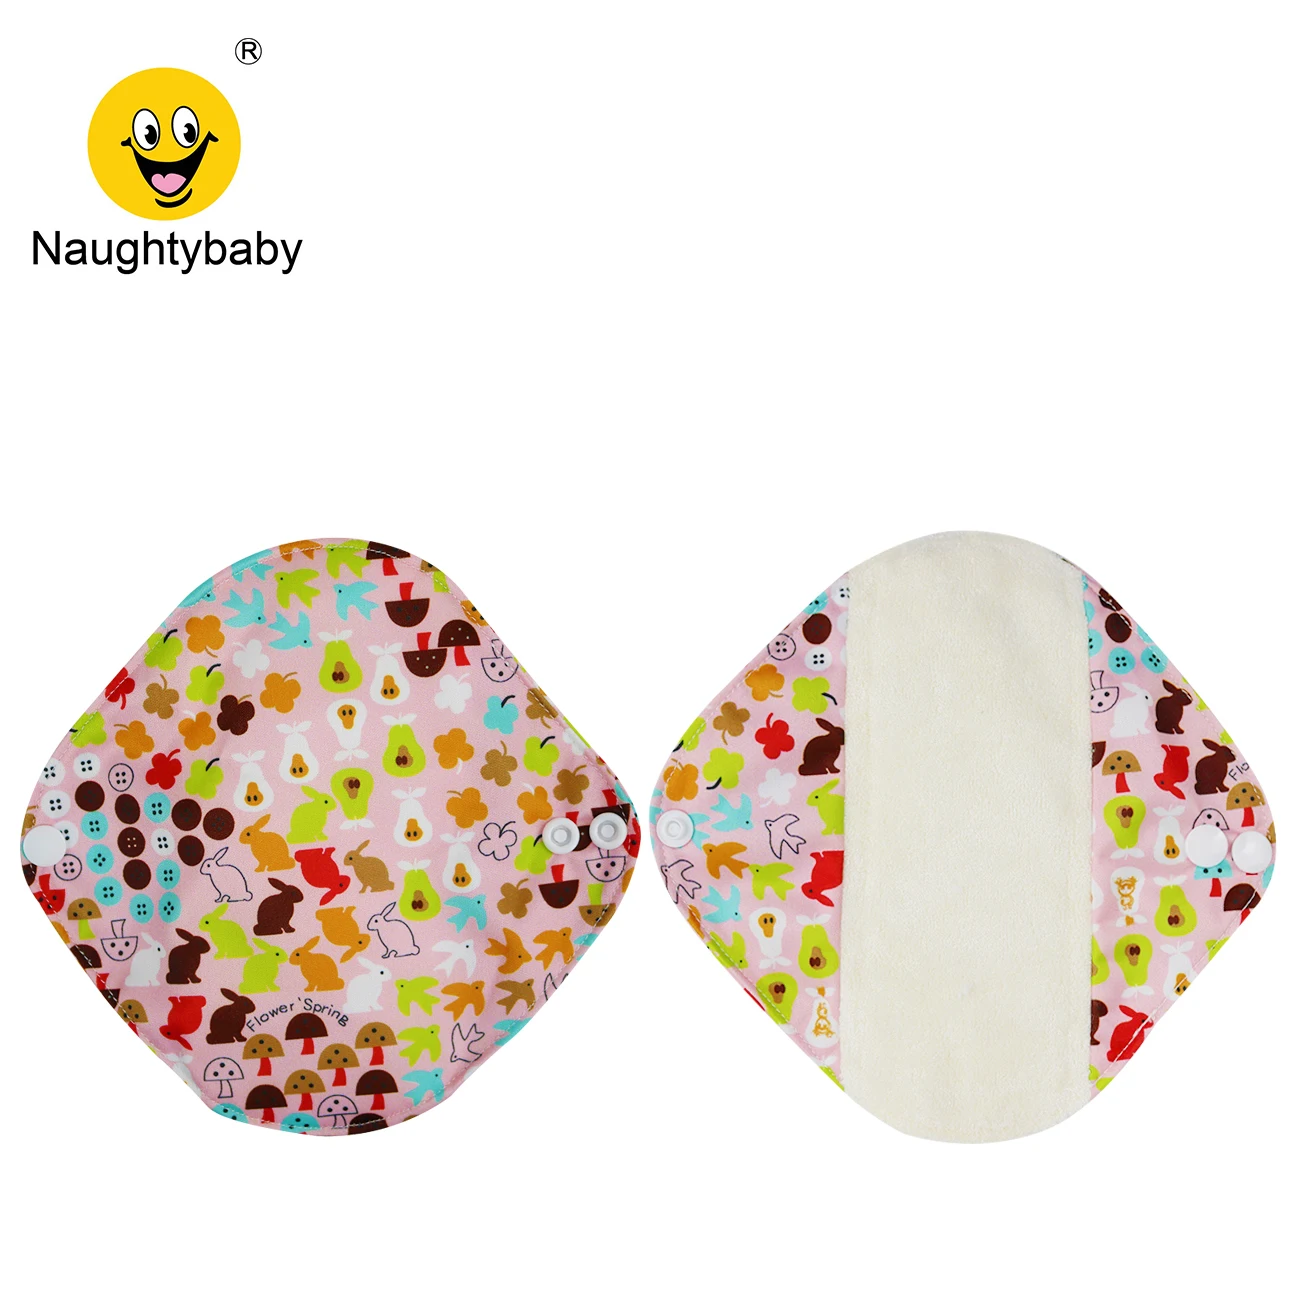 Soft Women Towel Pads Bamboo Cotton Feminine Absorbent Menstrual Cloth Washable Reusable Panty Liner Hygiene Sanitary Period